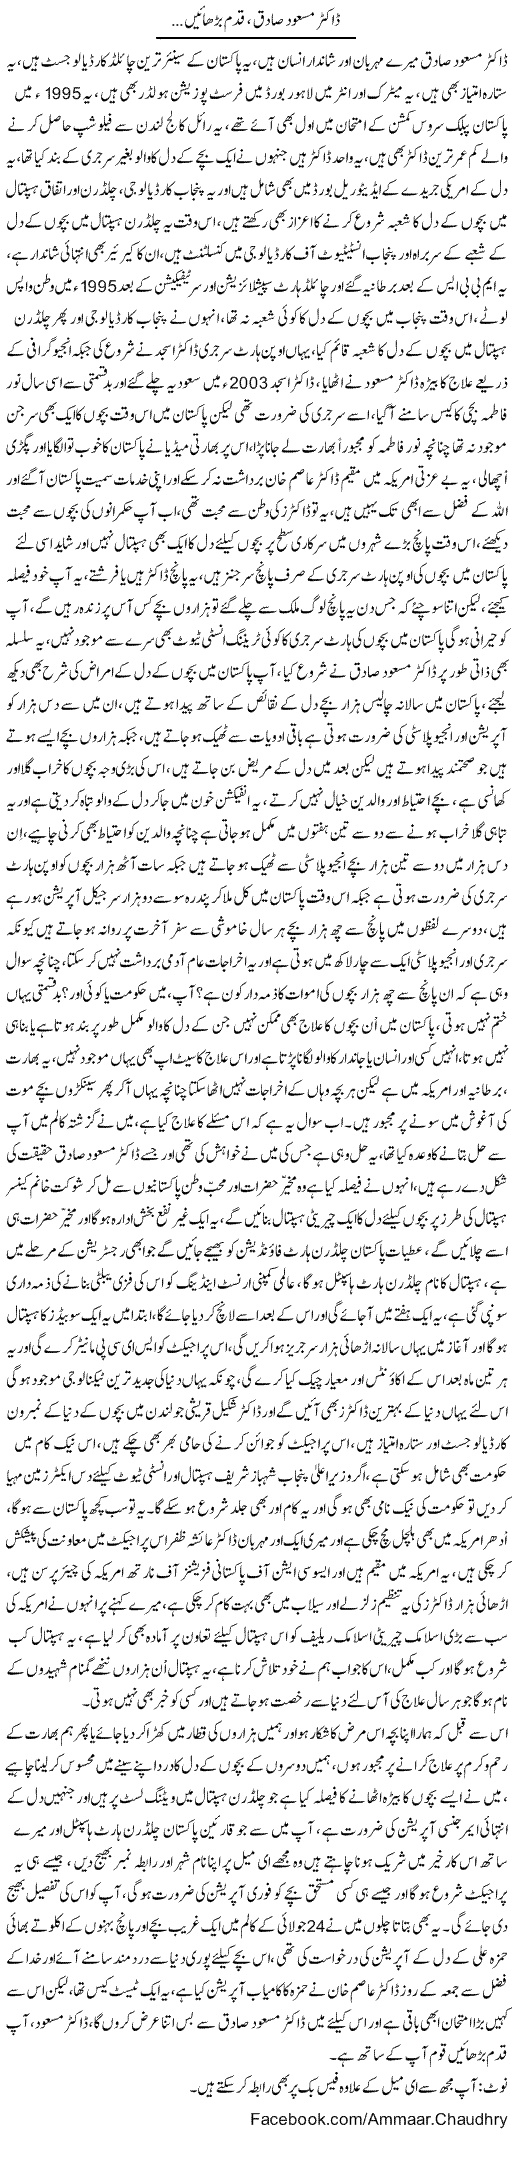 A Great Doctor Express Column Amad Chaudhry 7 August 2011